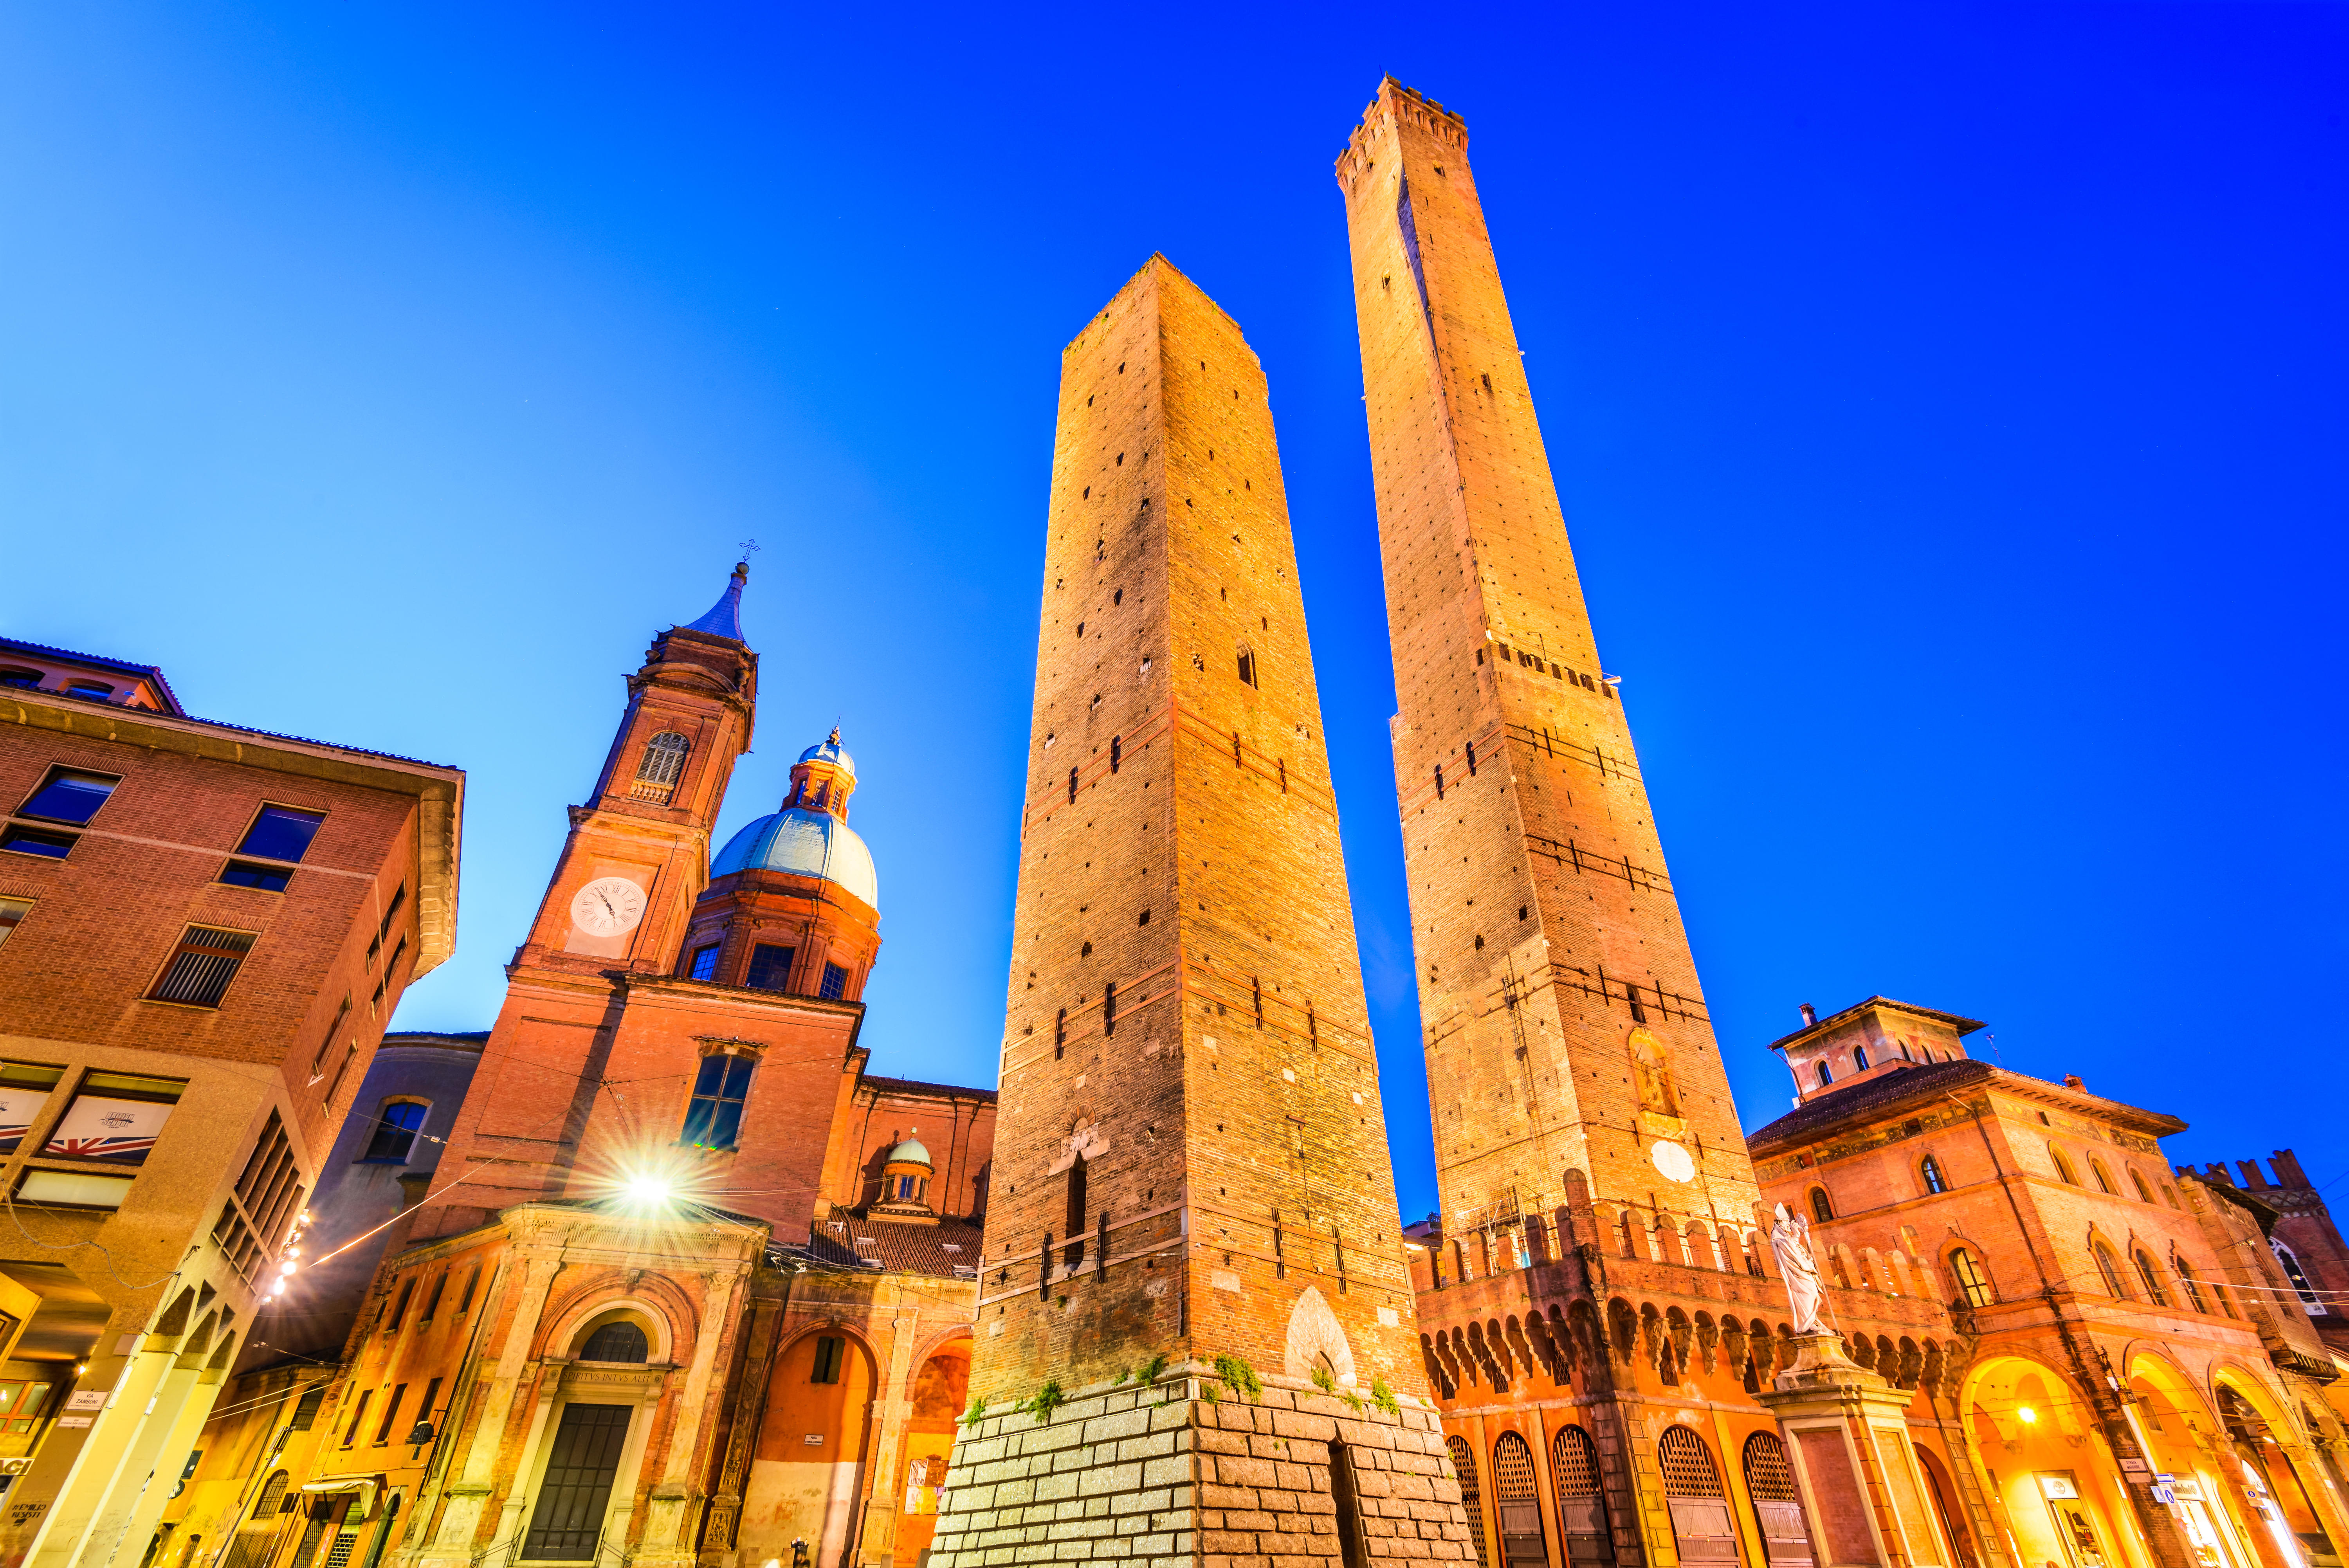 Explore the mediaeval marvel which is still standing in Bologna's historic district 